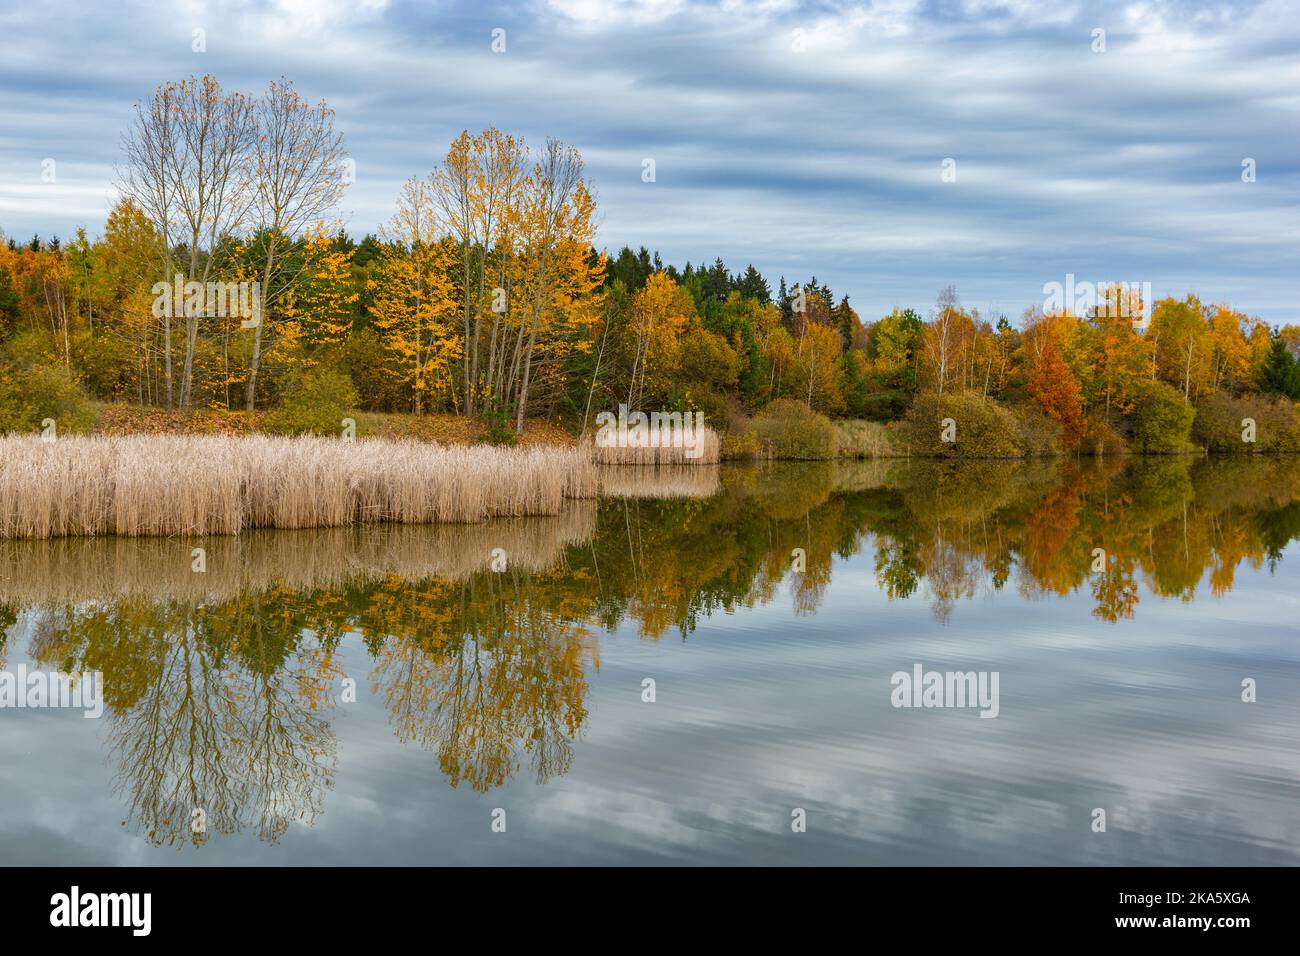 Forest lake in cloudy, autumn weather. Late fall. Europe. Stock Photo